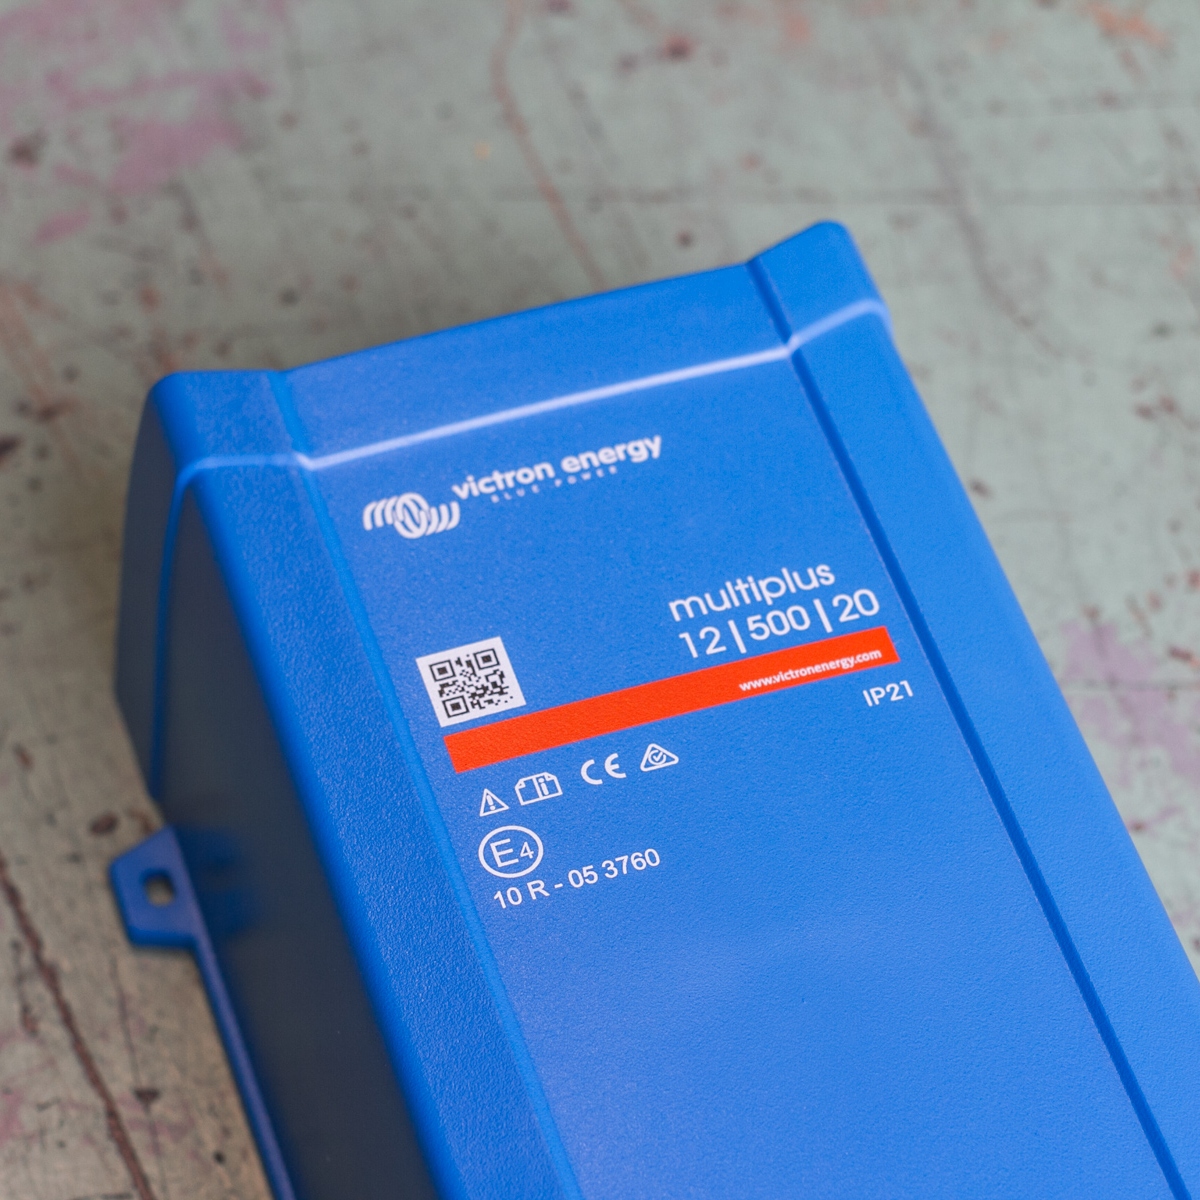 Close-up of a blue Victron MultiPlus 500VA 12V Inverter/Charger on a worn surface.